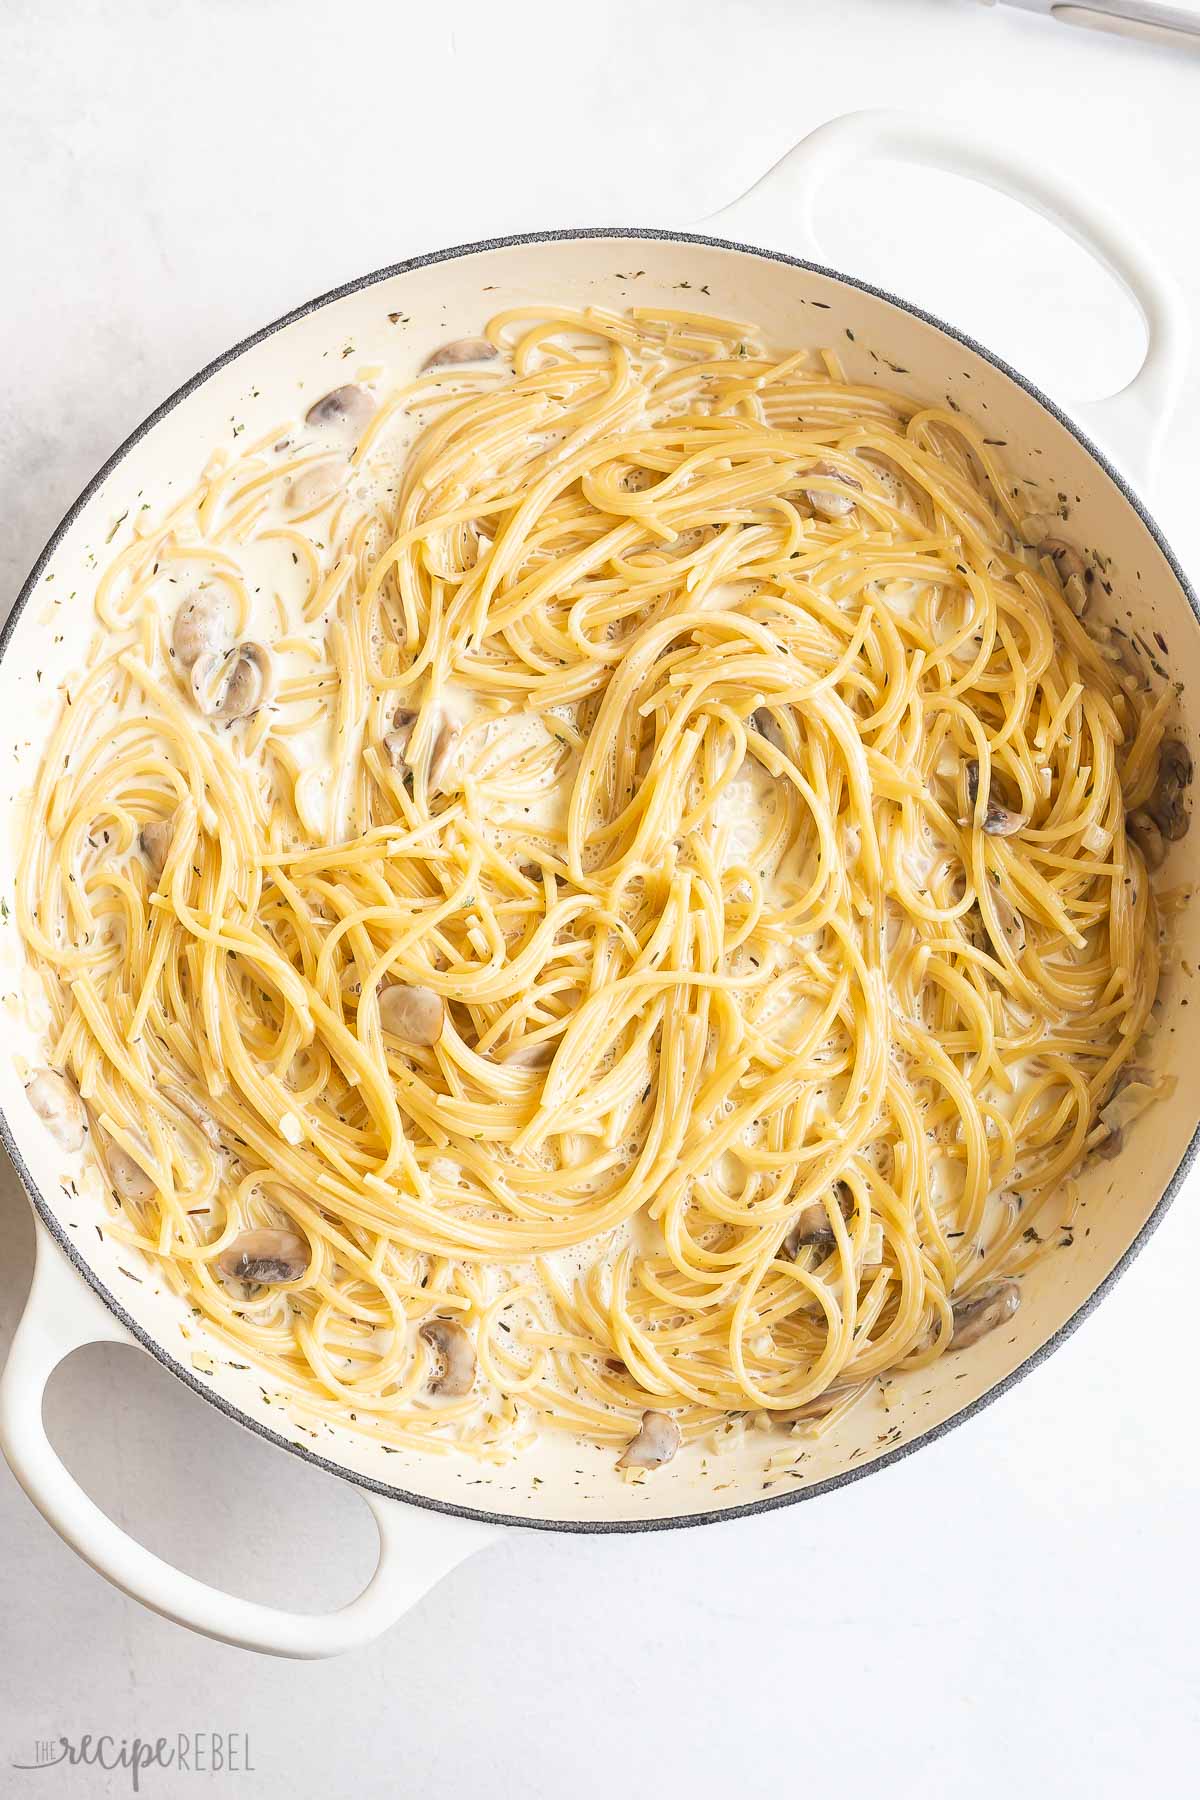 pasta noodles cooked in pan with cream and mushrooms.